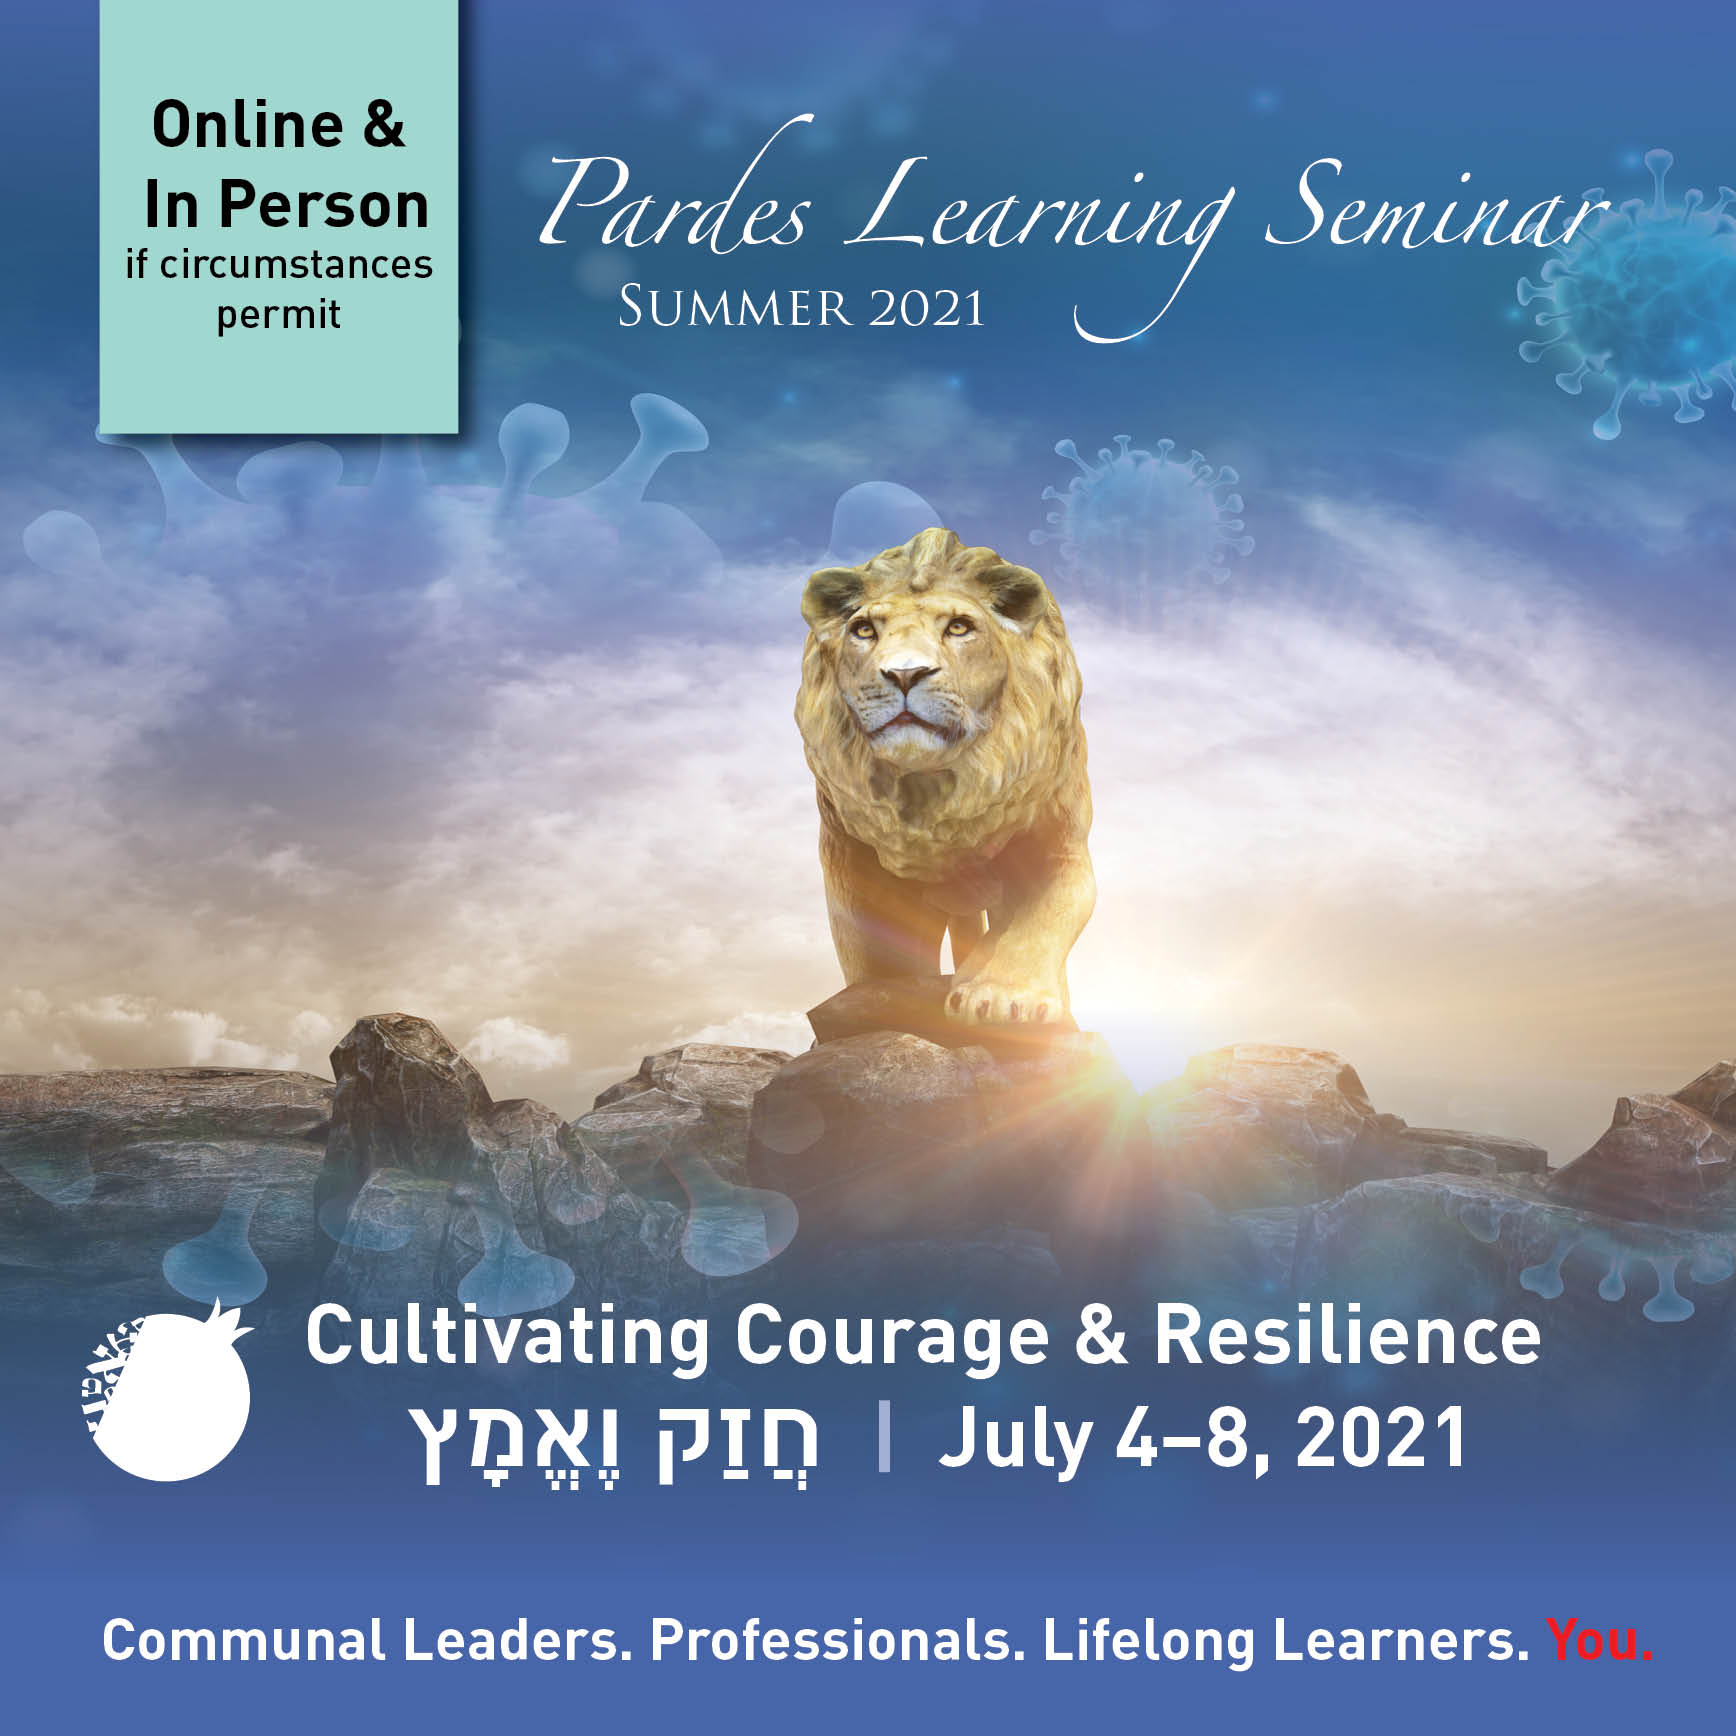 Pardes Learning Seminar Summer 2021: Resilience & Courage